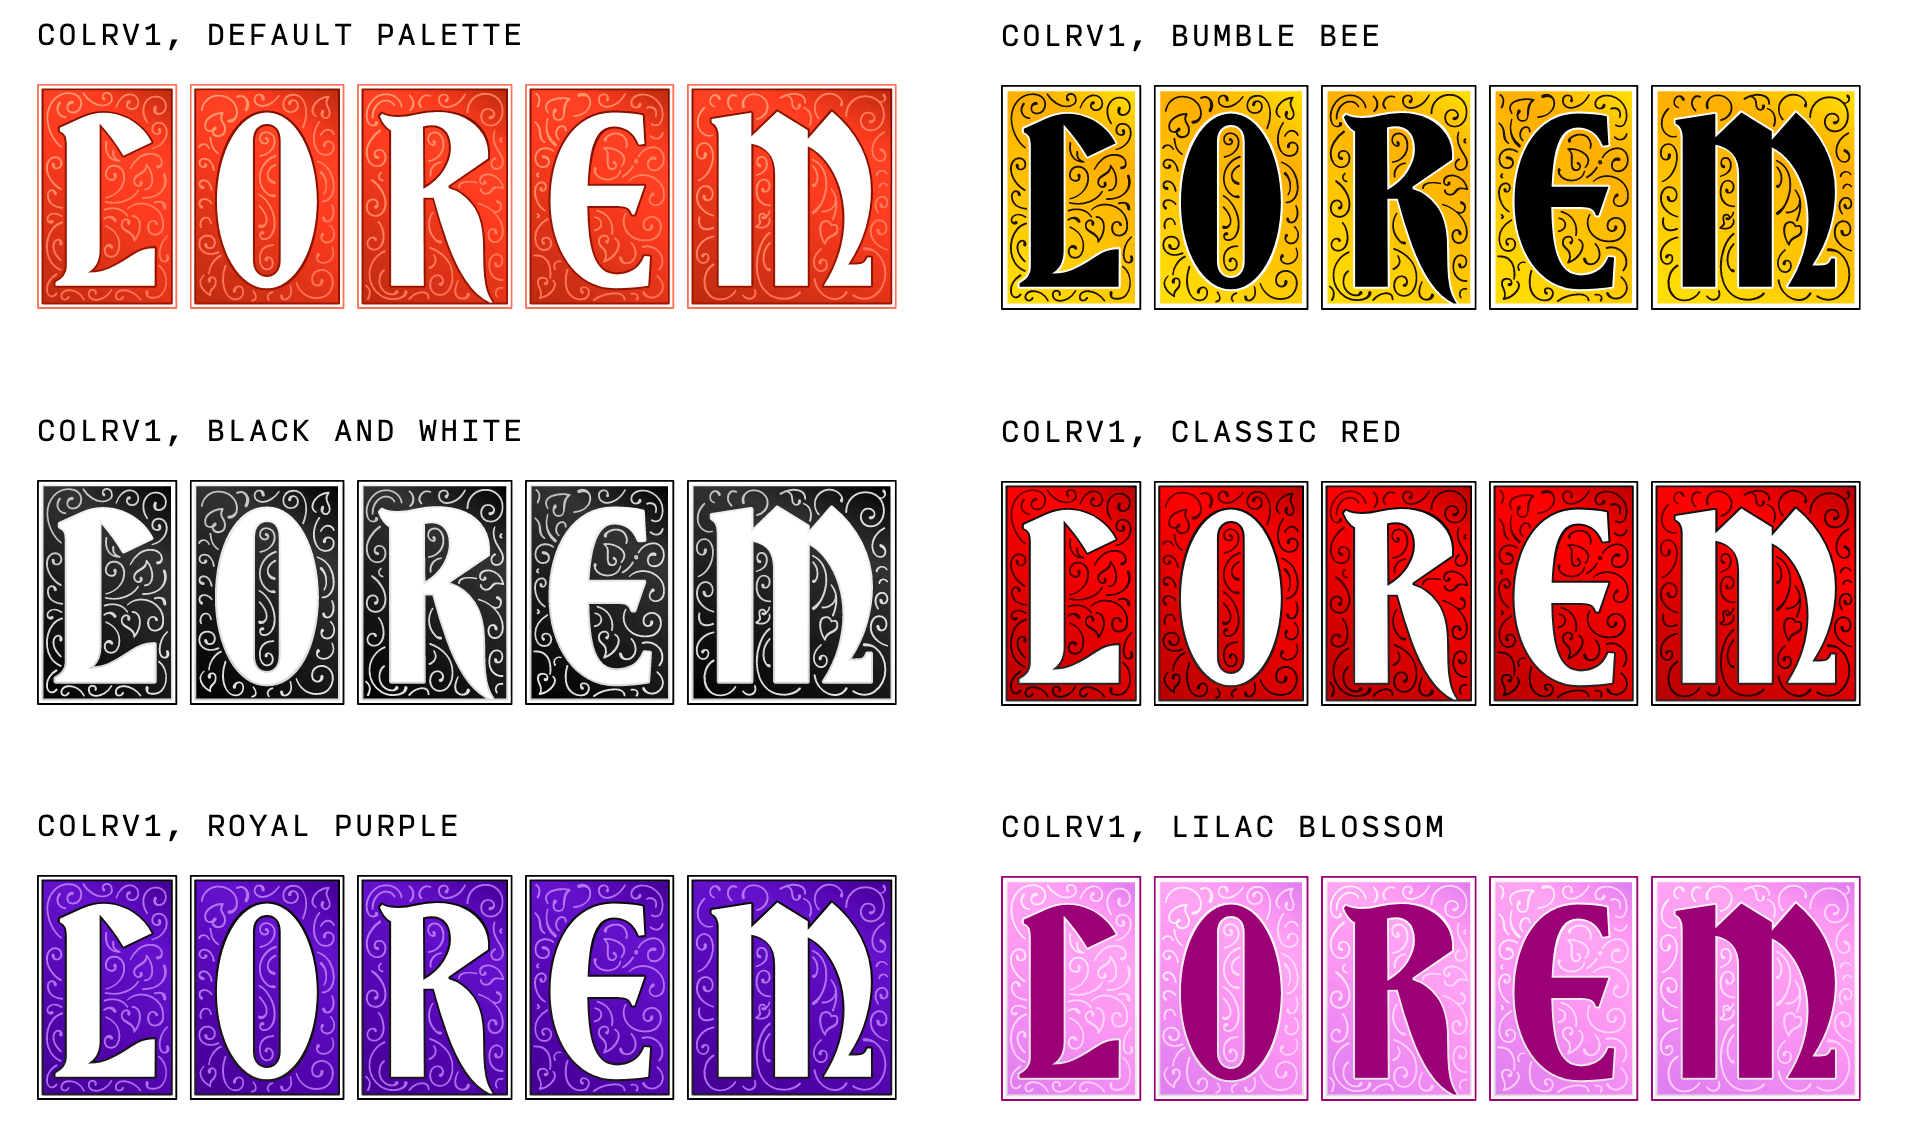 Bradley Initials using COLR v1 and multiple palettes by David Jonathan Ross.